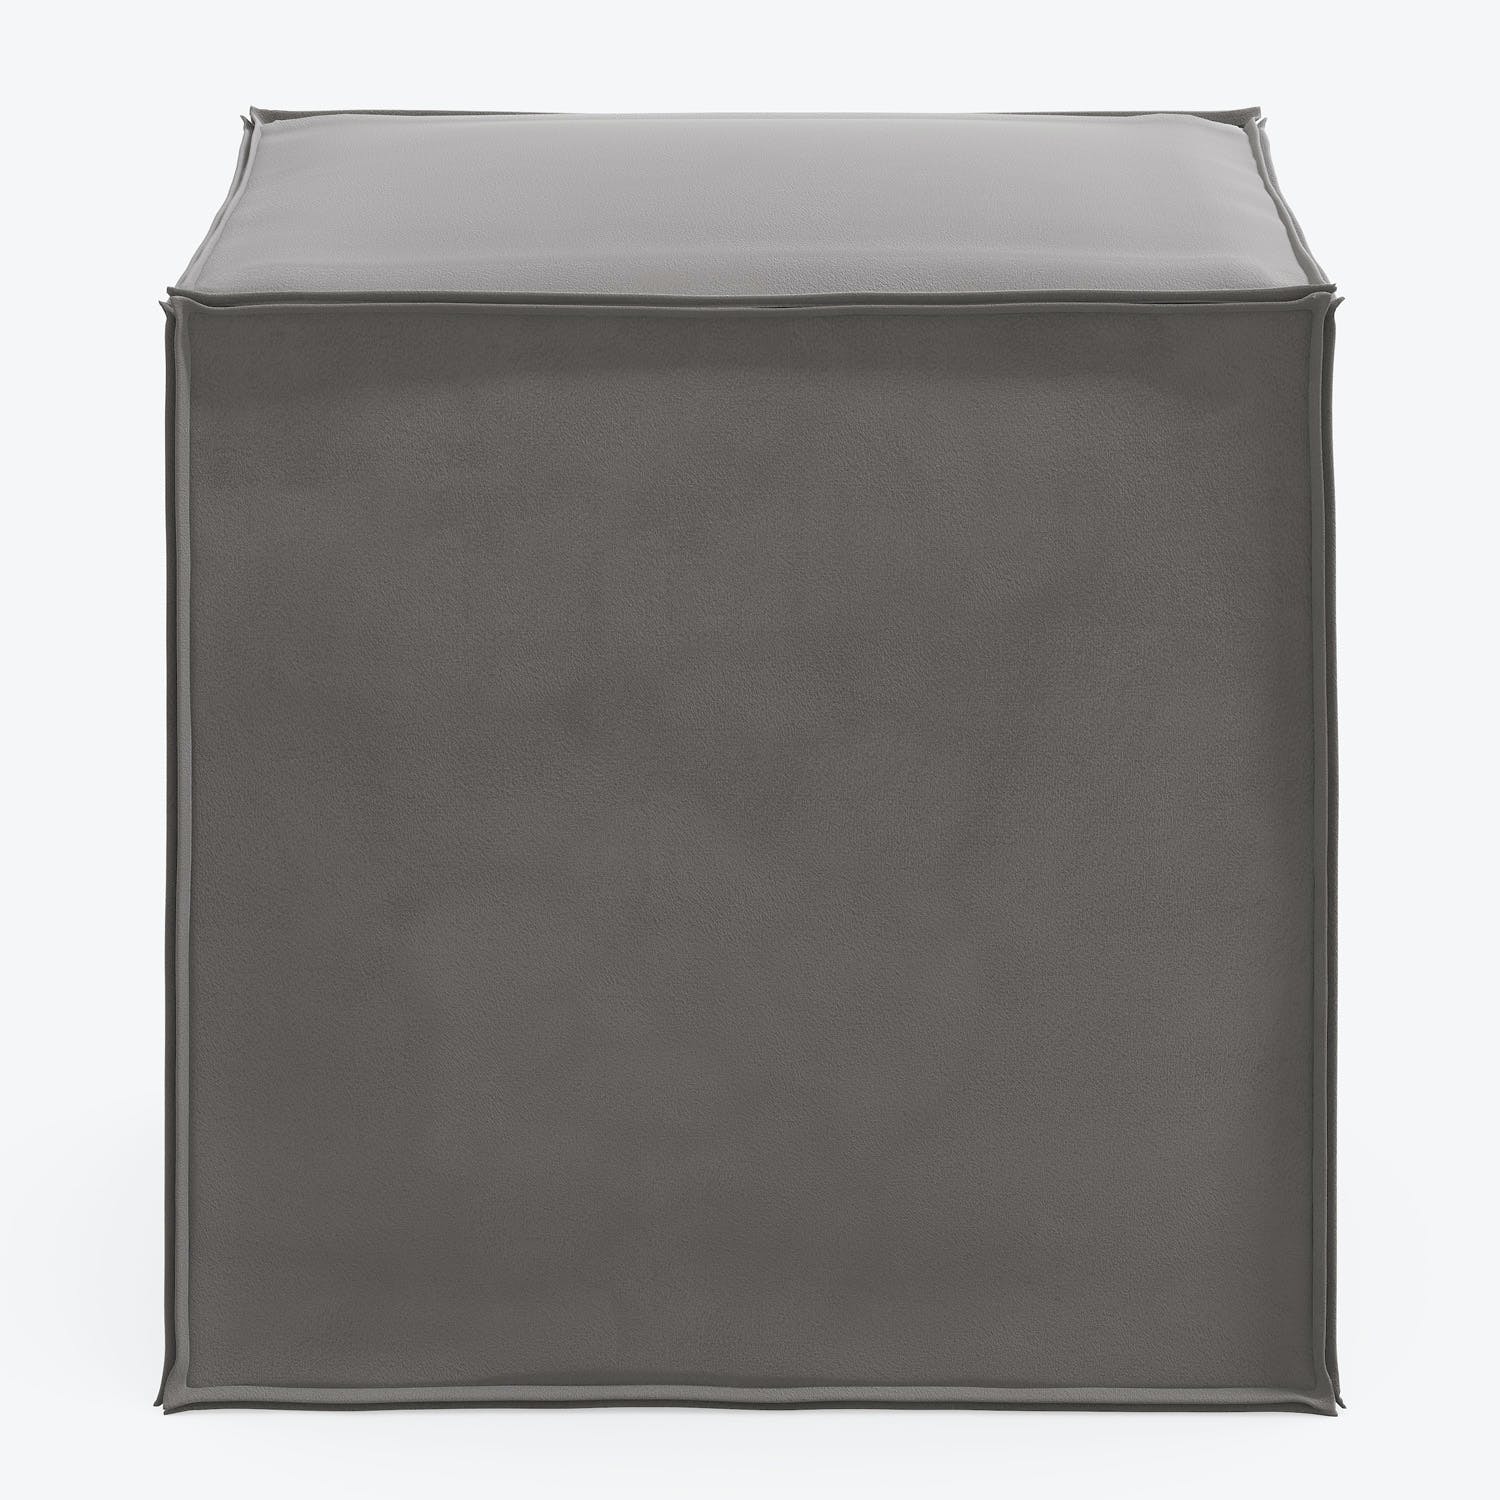 Abstract grey rectangular object with smooth surface, lacking texture or shadow.